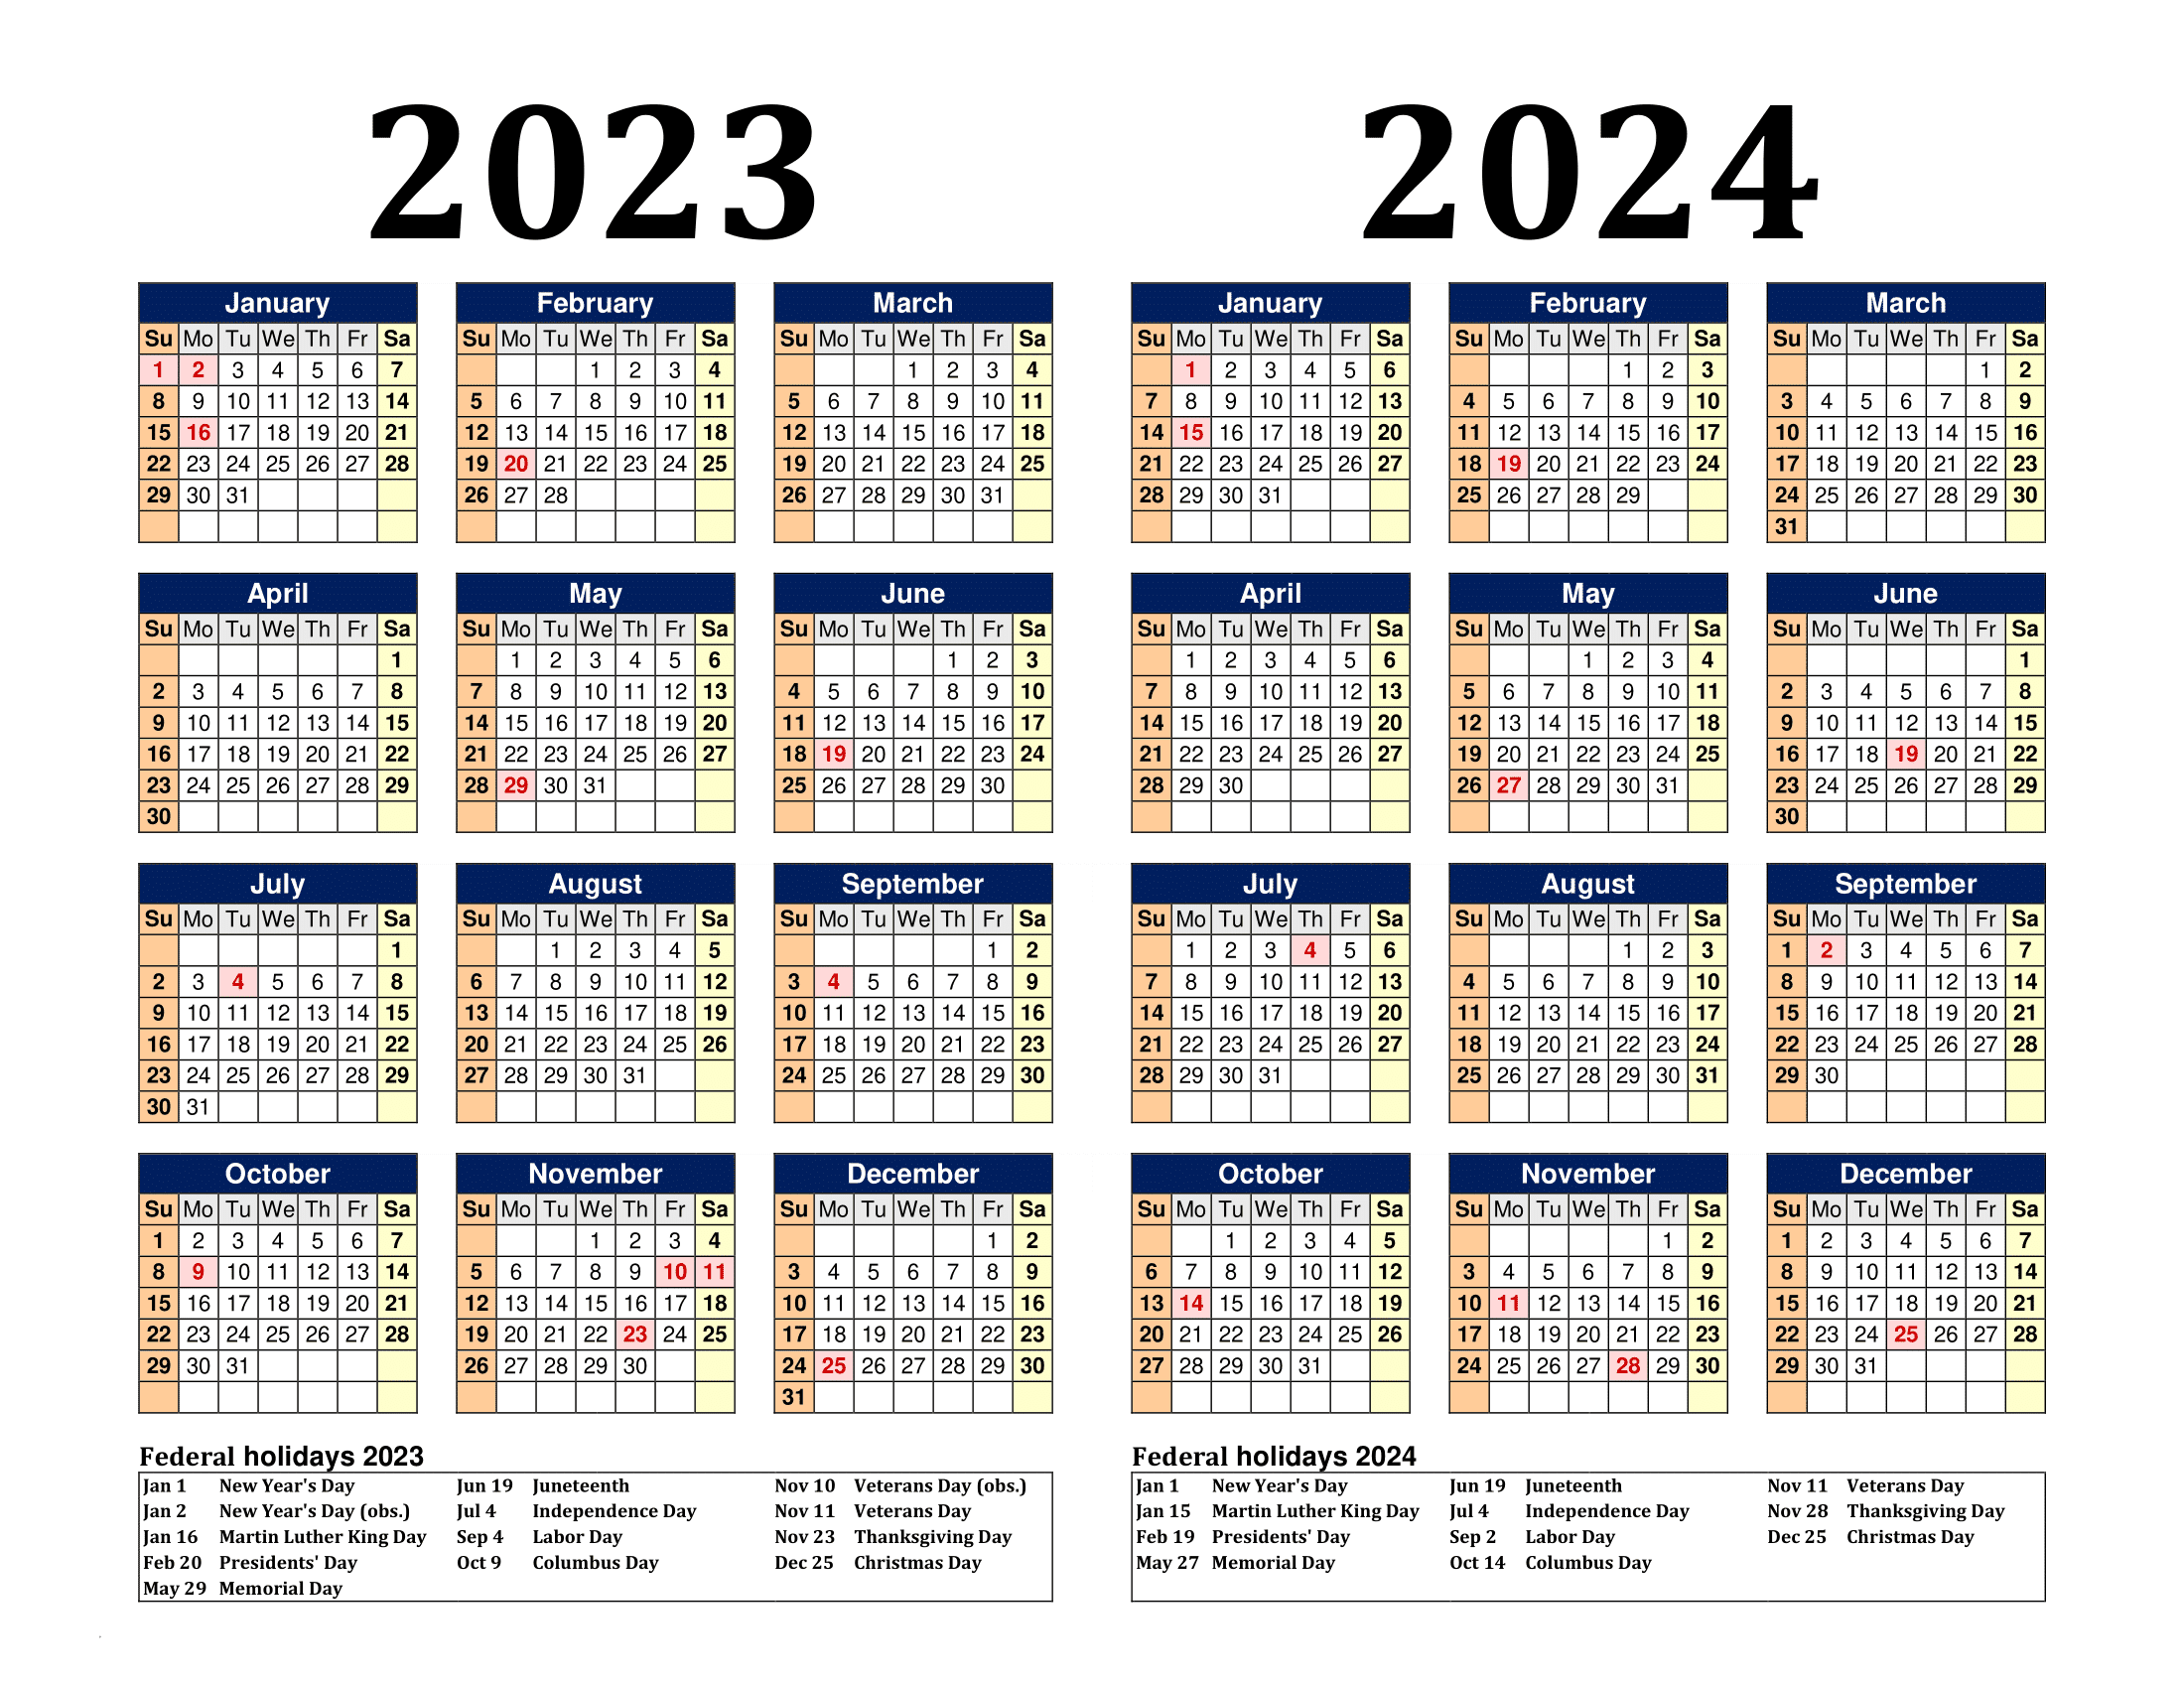 Free Printable Two Year Calendar Templates For 2023 And 2024 In Pdf for 2023 And 2024 Free Printable Calendar